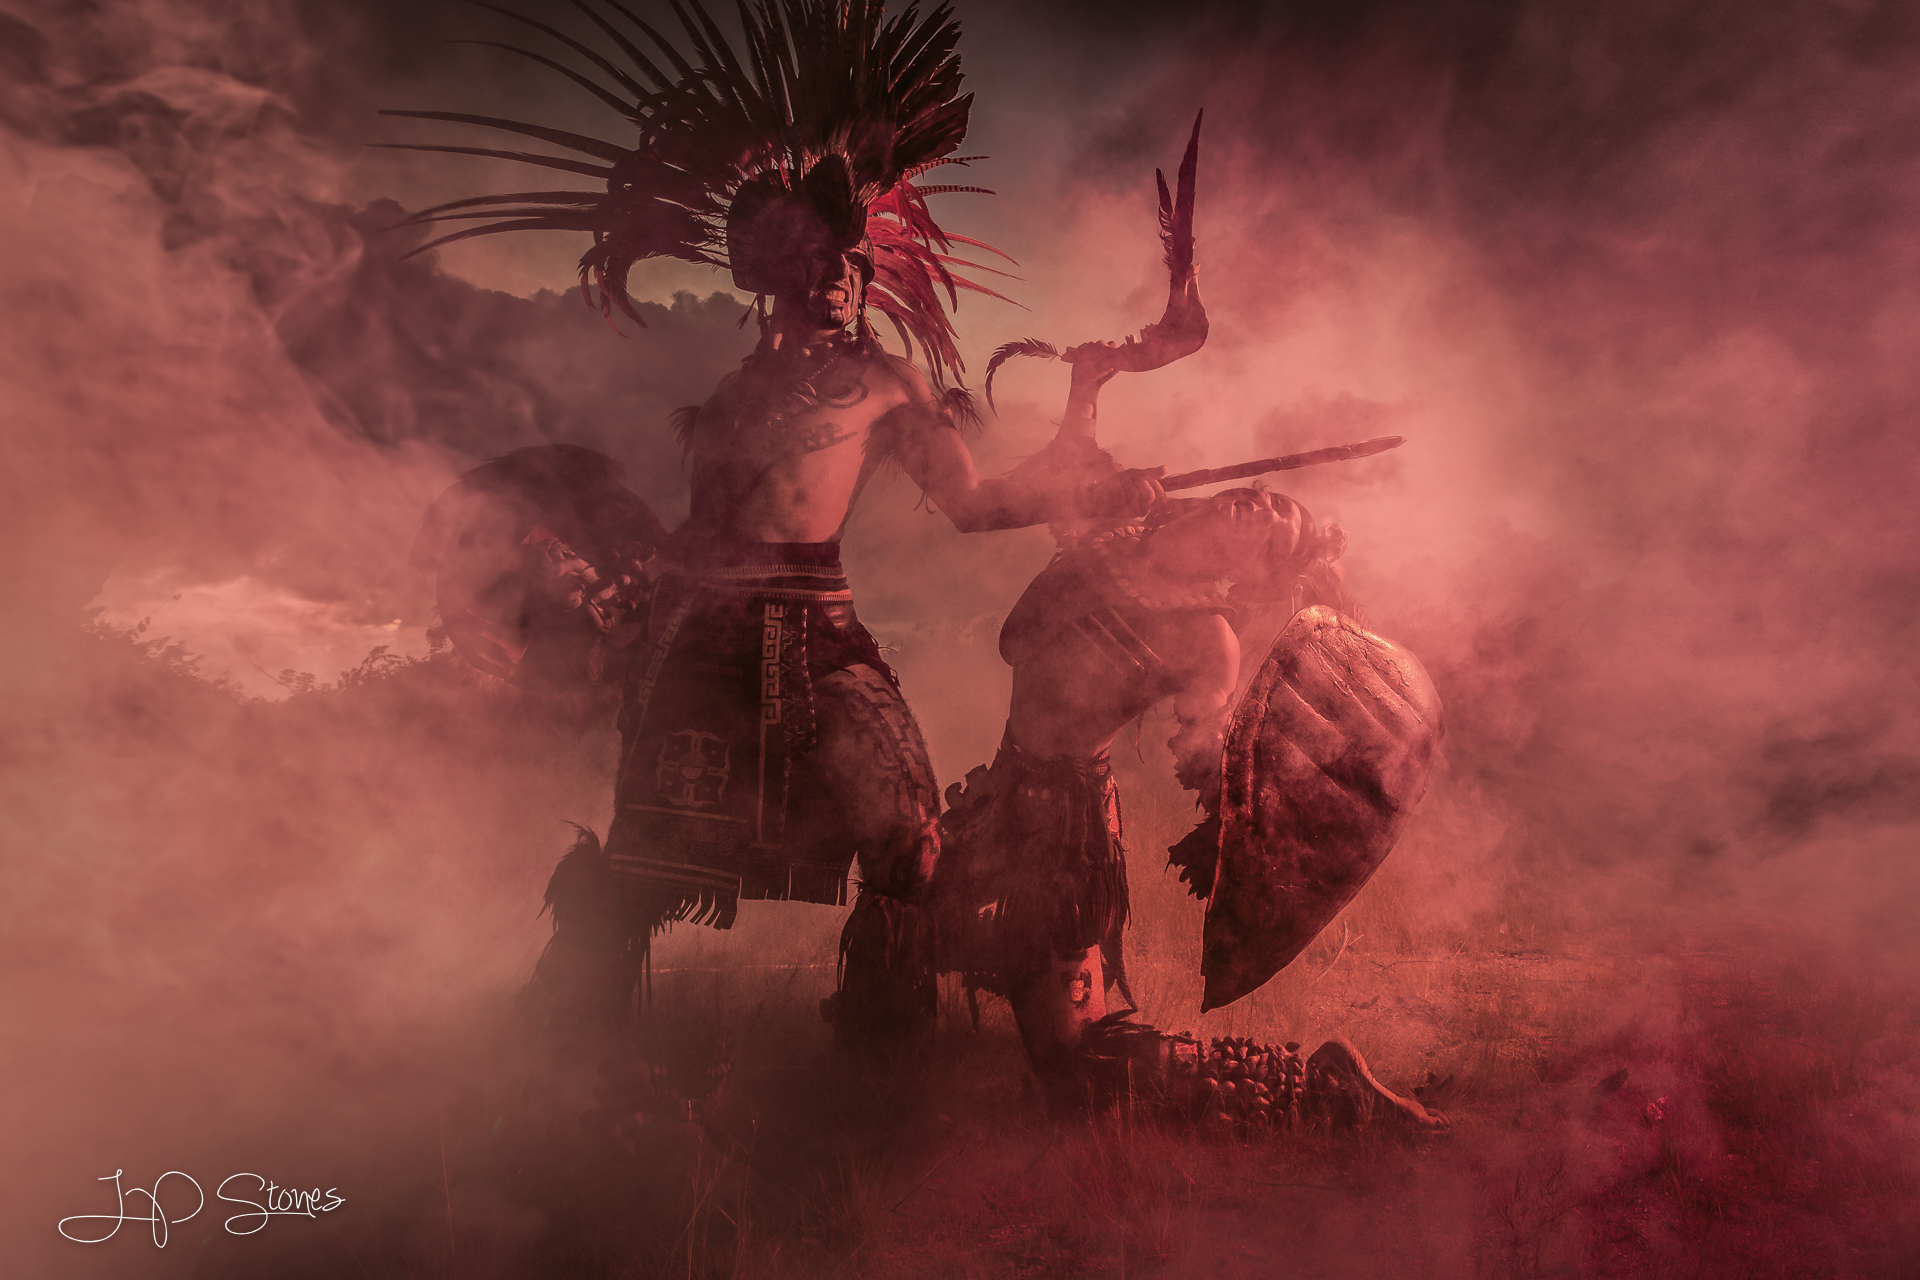 Behind the Scenes Epic Aztec Photoshoot by JP Stones Photography